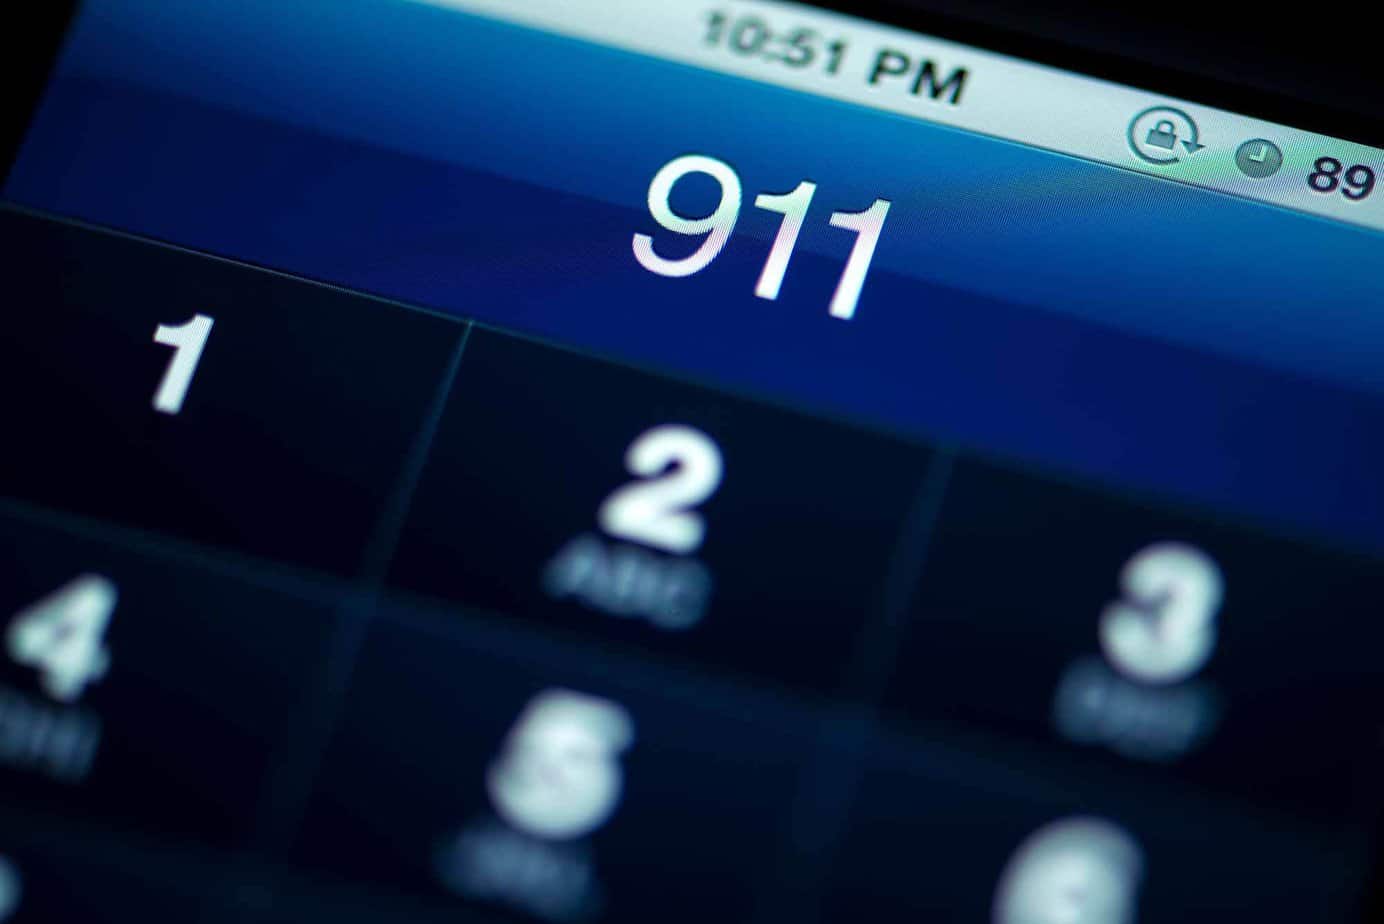 911 dialed on phone screen